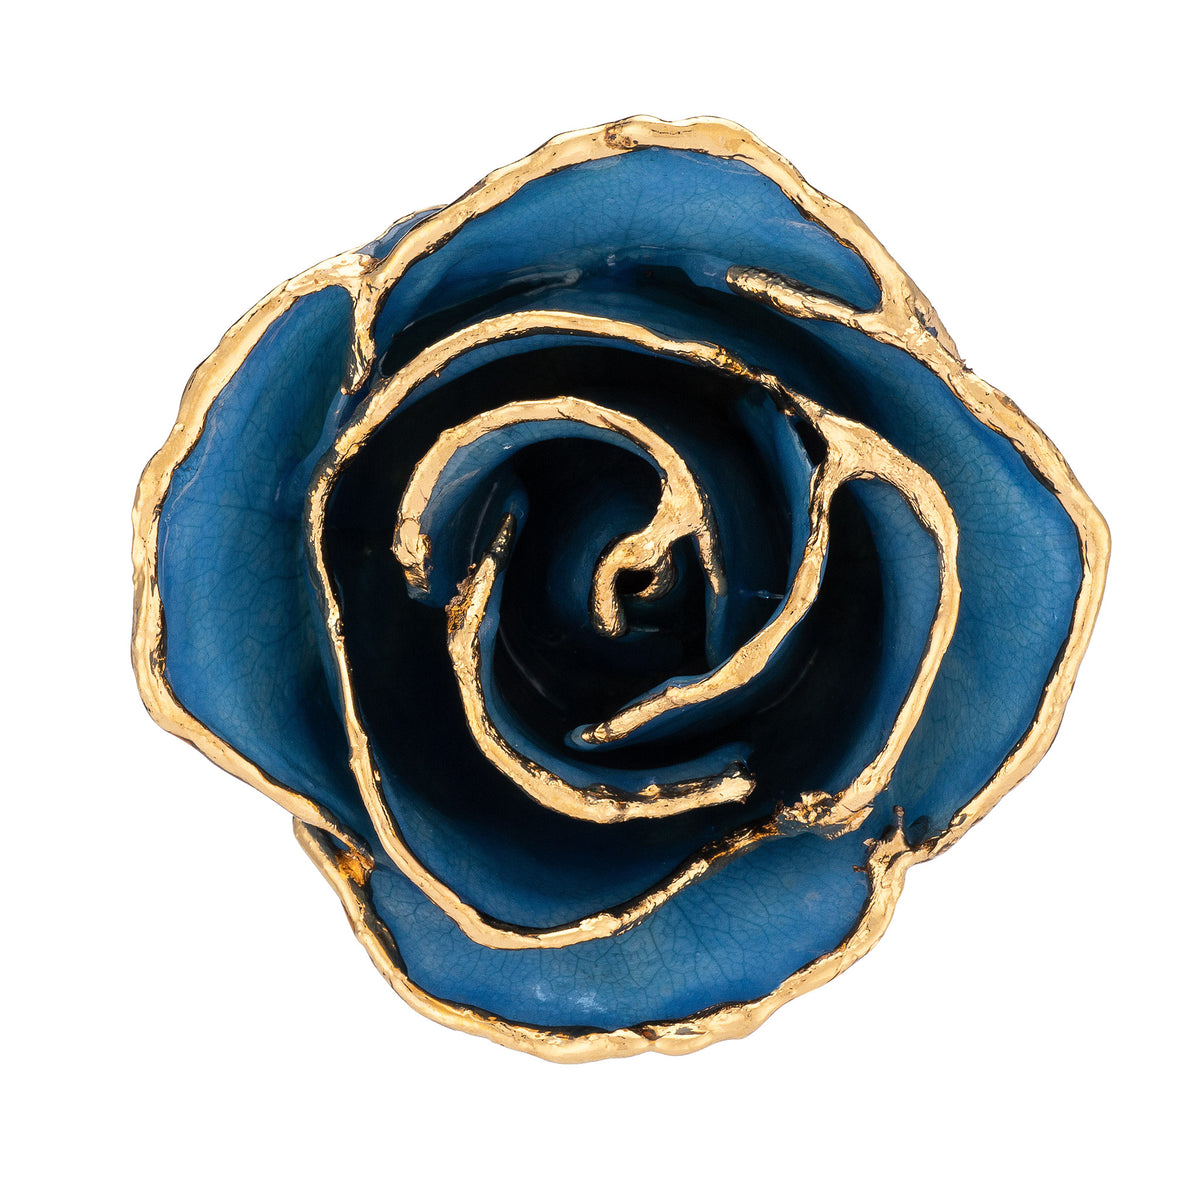 24K Gold Trimmed Forever Rose with Blue Petals  and Showing Detail of Gold Trim